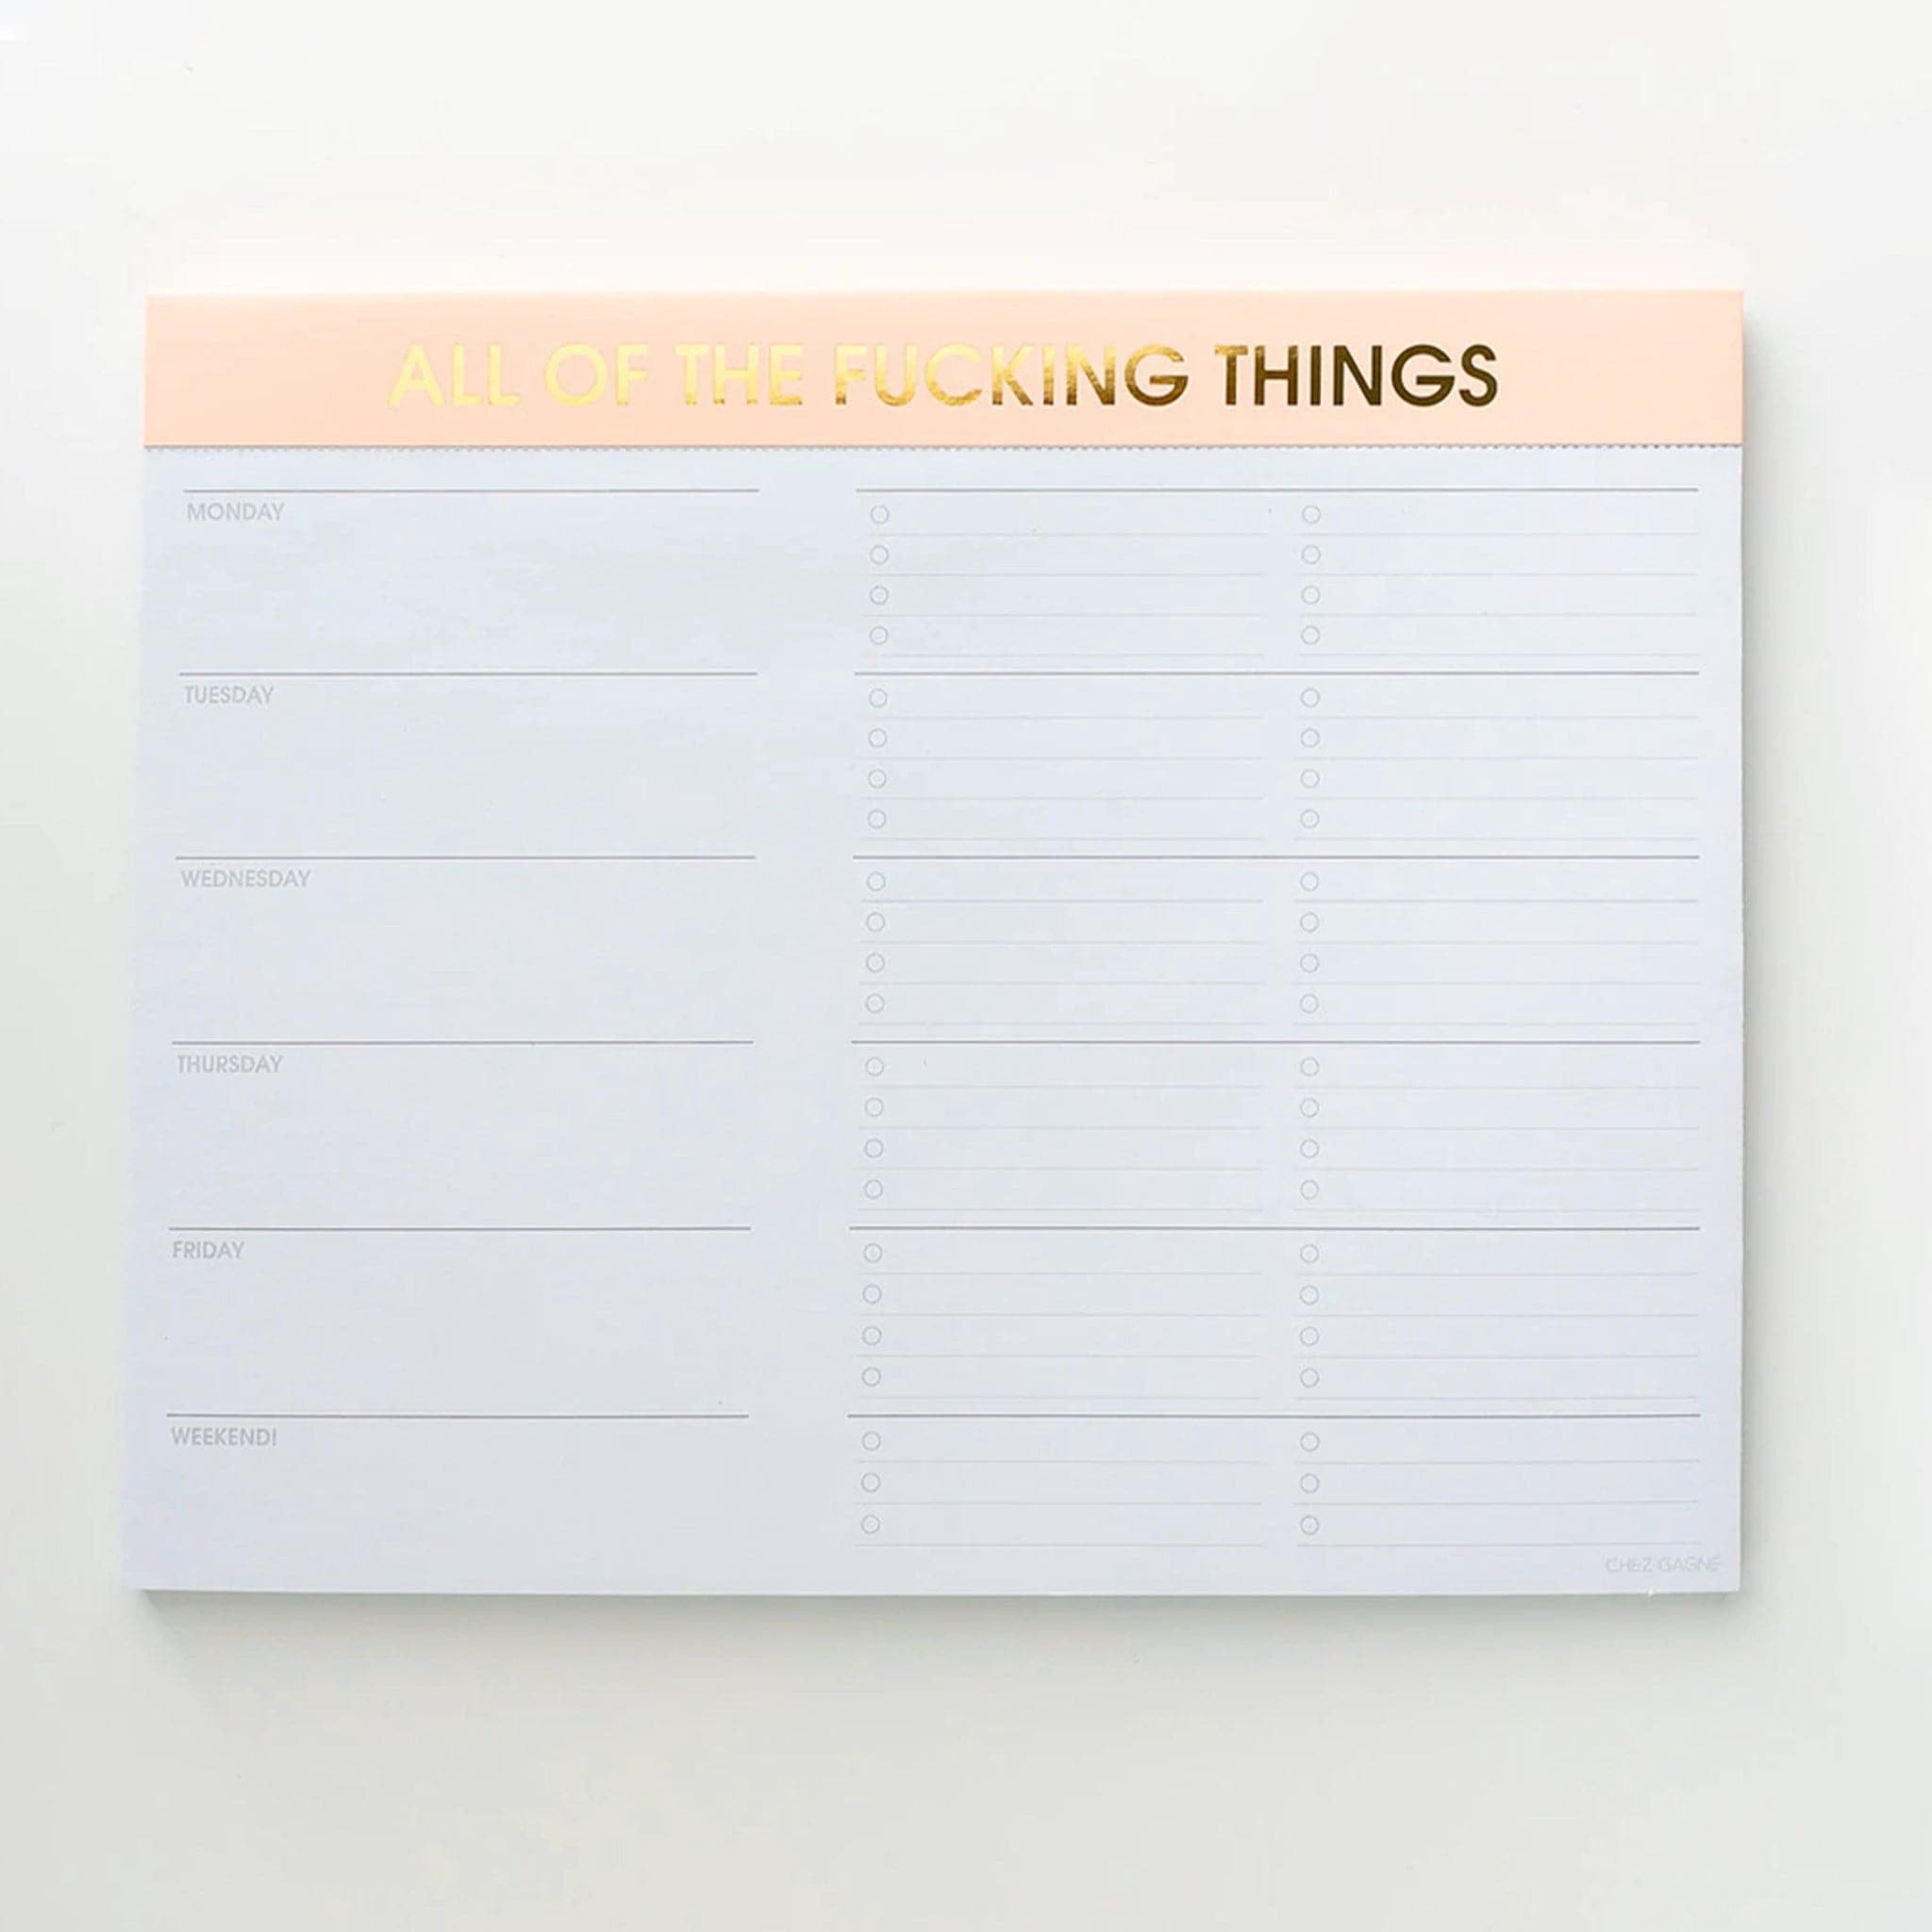 Weekly note pad with one column listing the days of the week, and next to each day are bullet pointed spaces to fill in your needs. The binding at the top is light yellow with gold foil letters saying, "All of the fucking things."